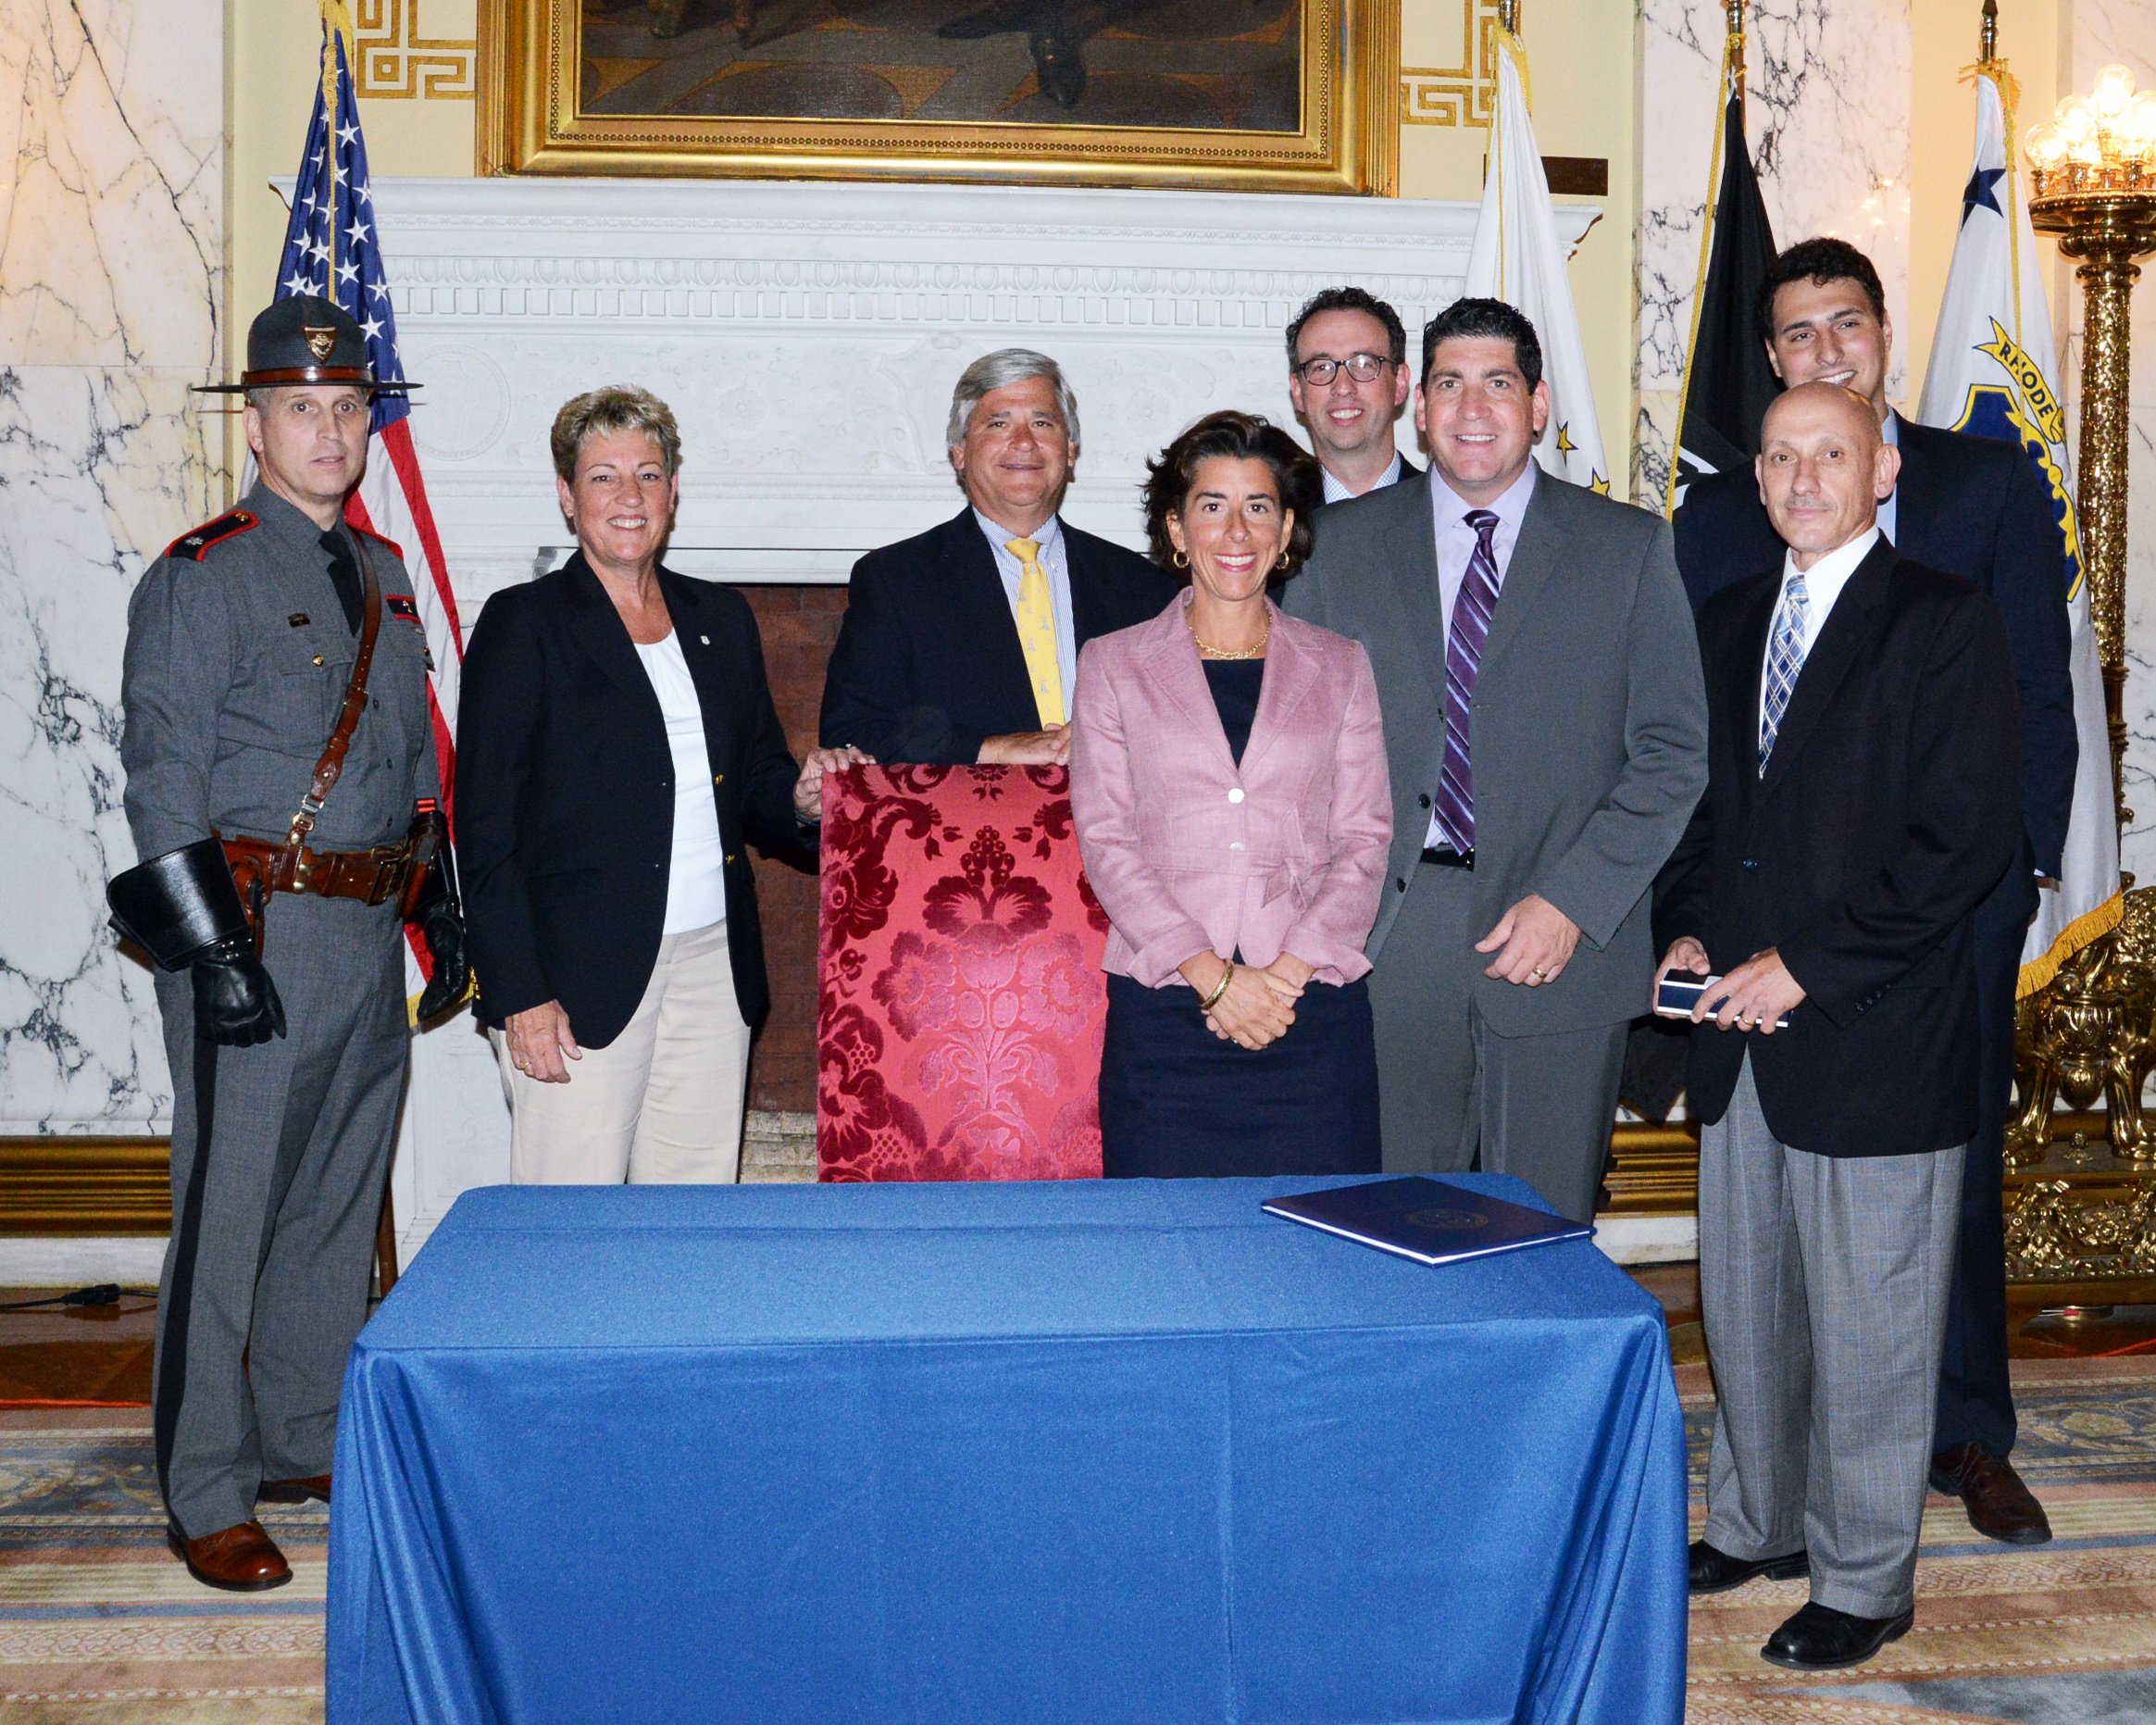 Rhode Island’s Identity Theft Protection Act of 2015 Signing